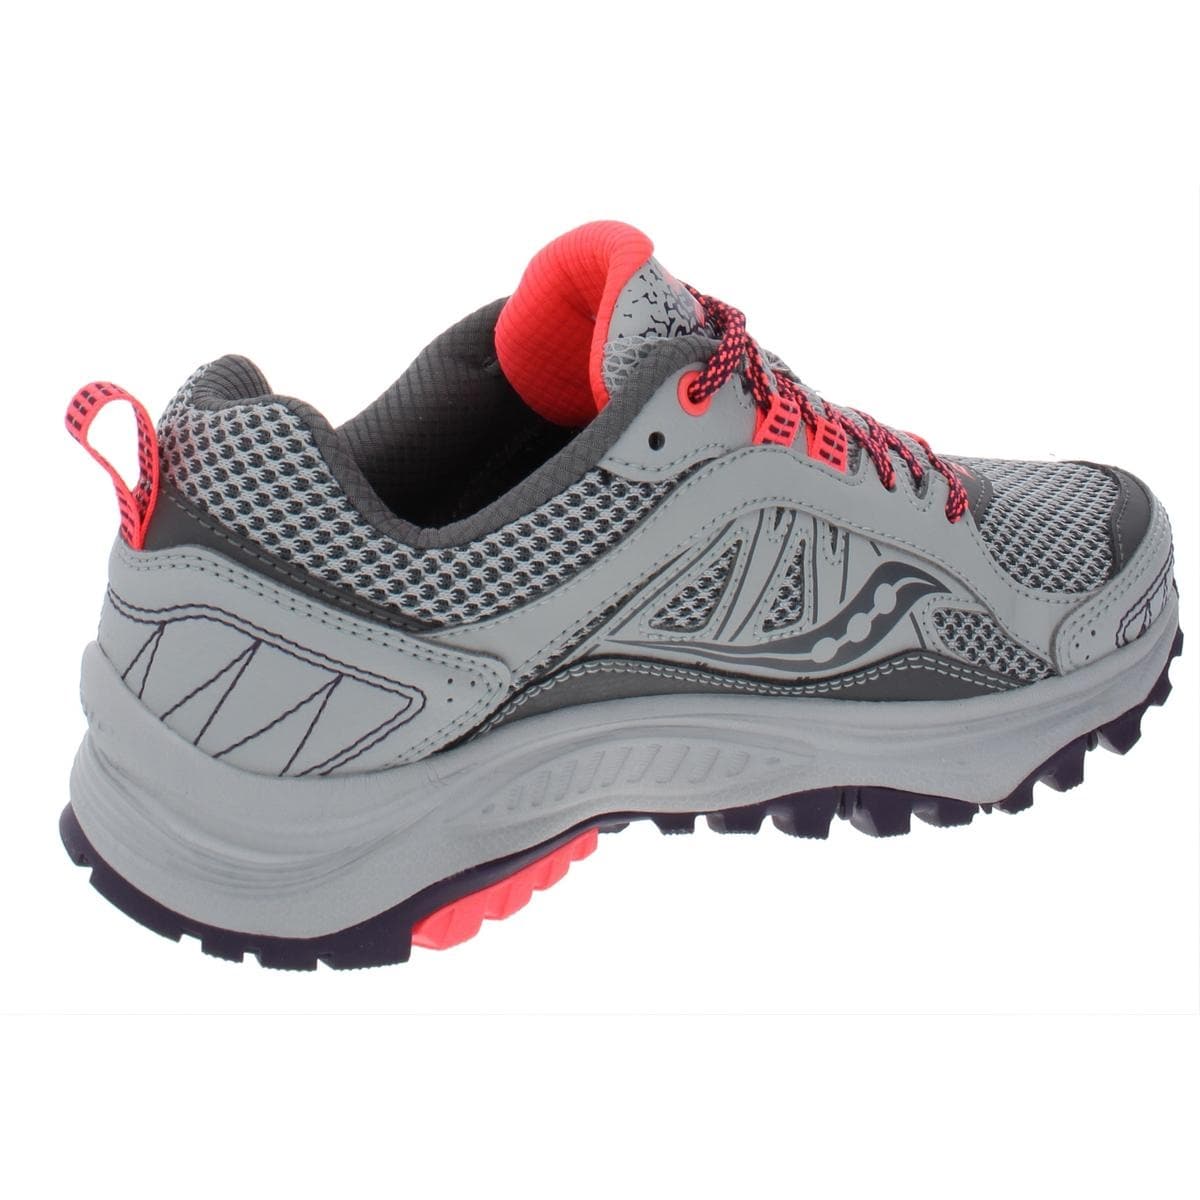 saucony excursion tr9 trail running shoe